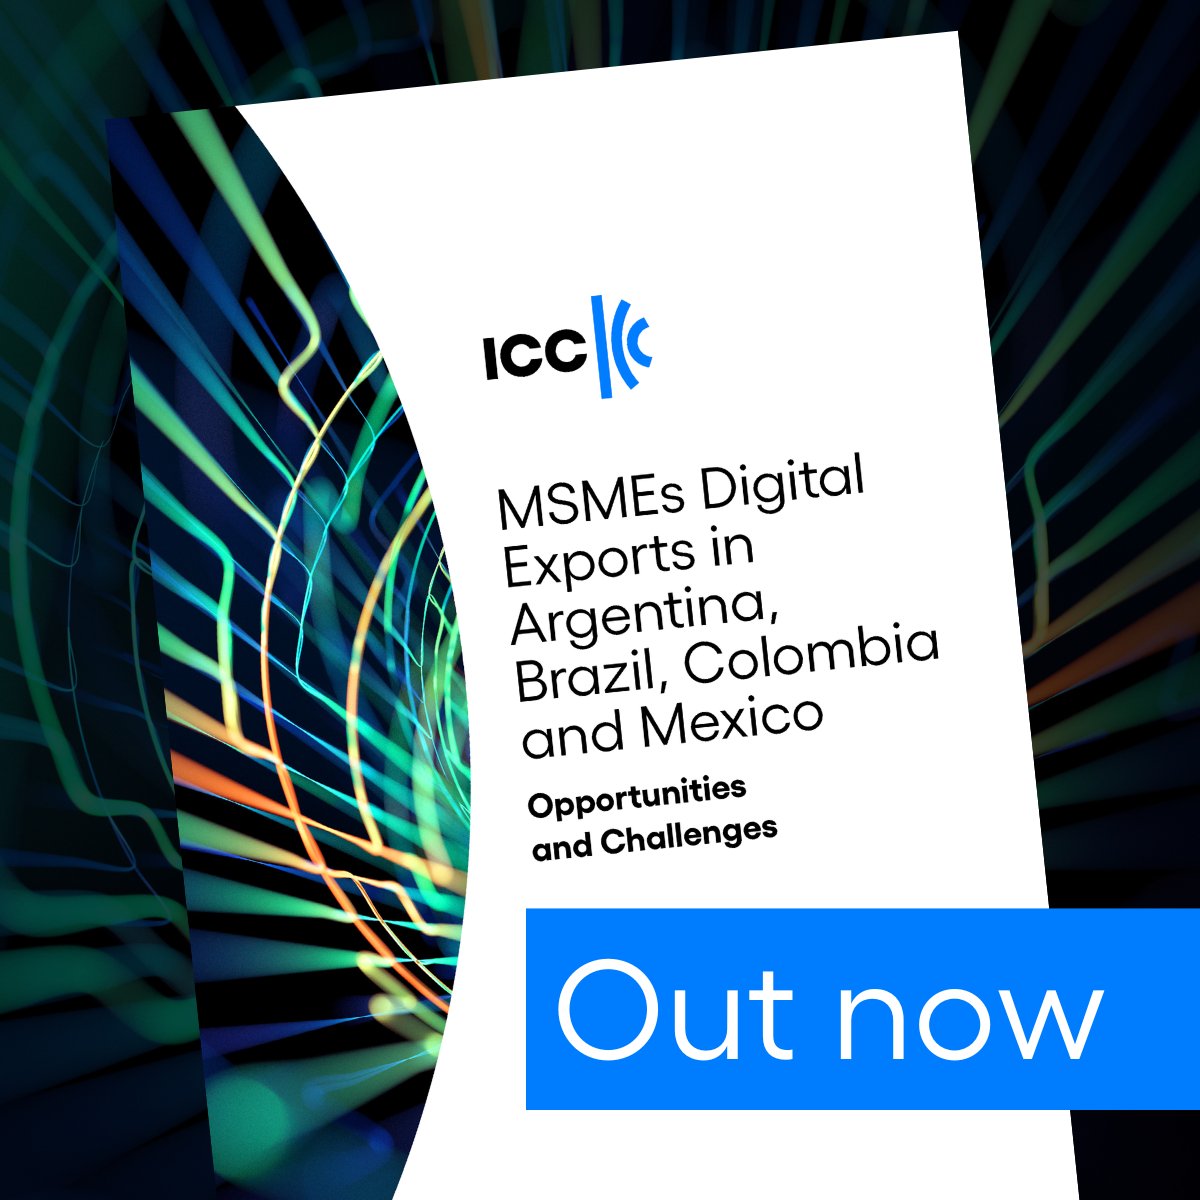 🌎 How can Latin America's #smallbusinesses go global? Our latest report unveils the transformative role of digital tools in boosting #trade for micro-, small-, and medium-sized enterprises #MSMEs across Latin America. Download the full report here: bit.ly/4csOzu5